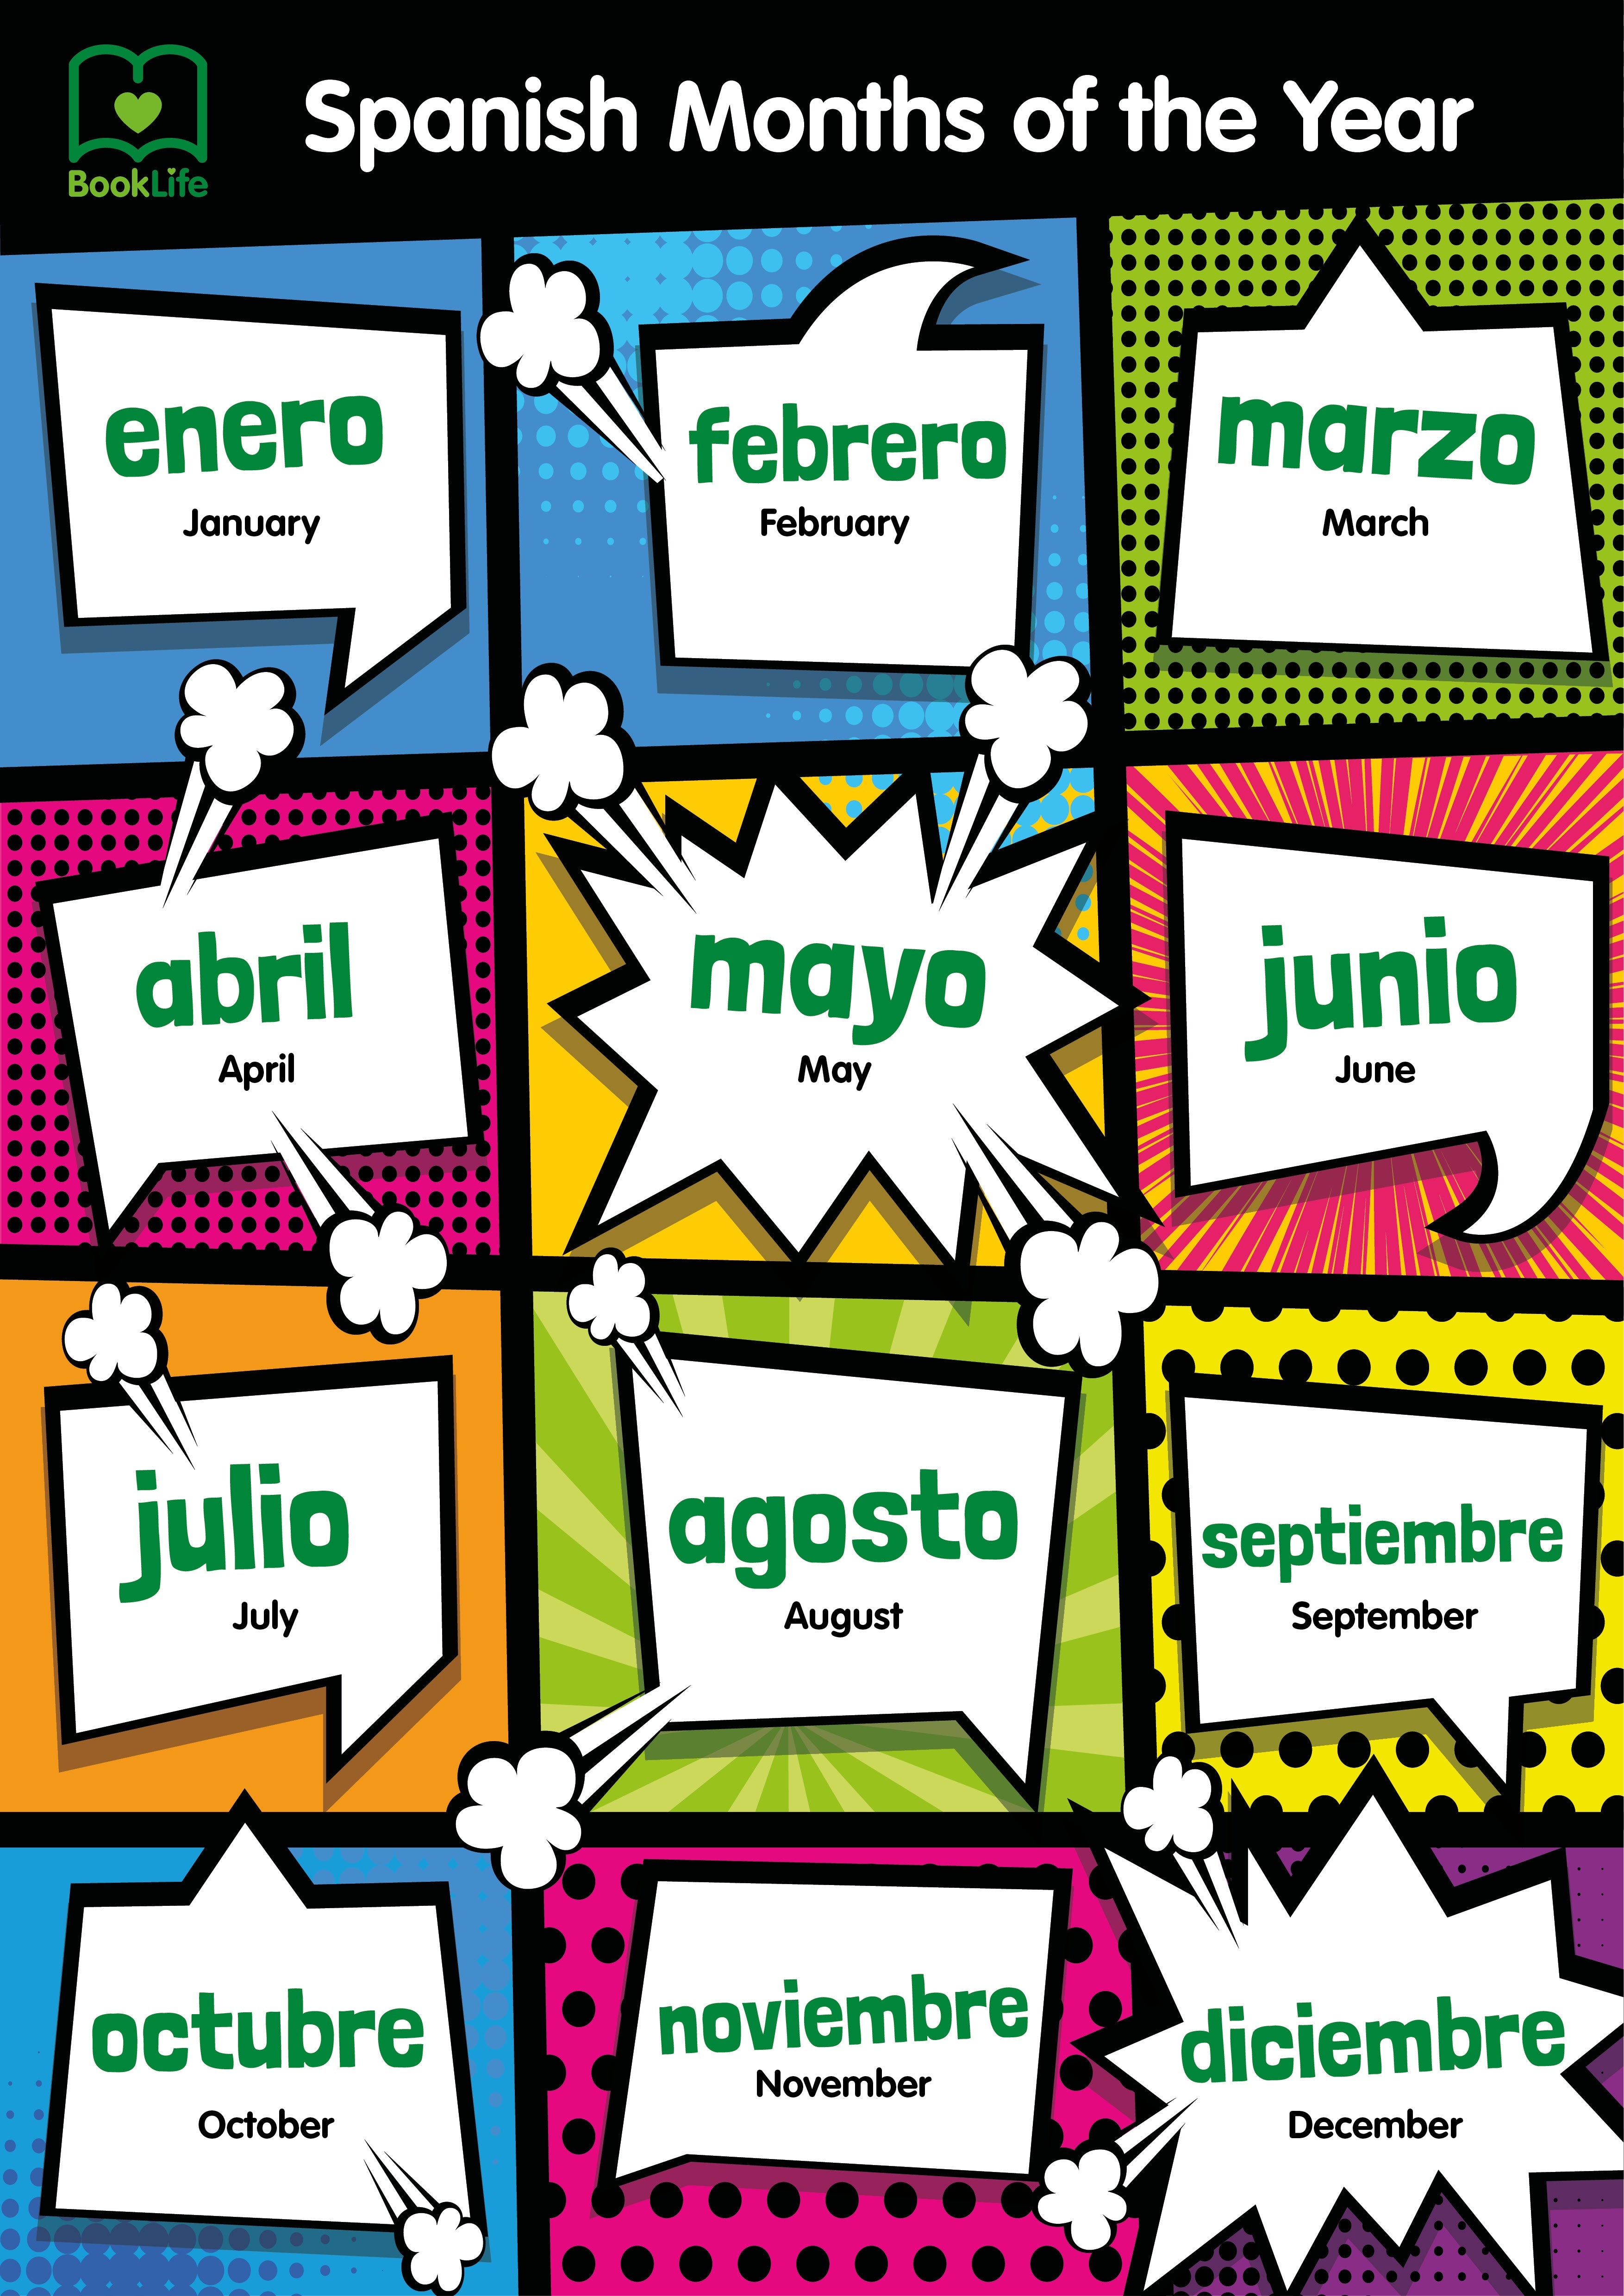 Free Spanish Months of the Year Poster by BookLife